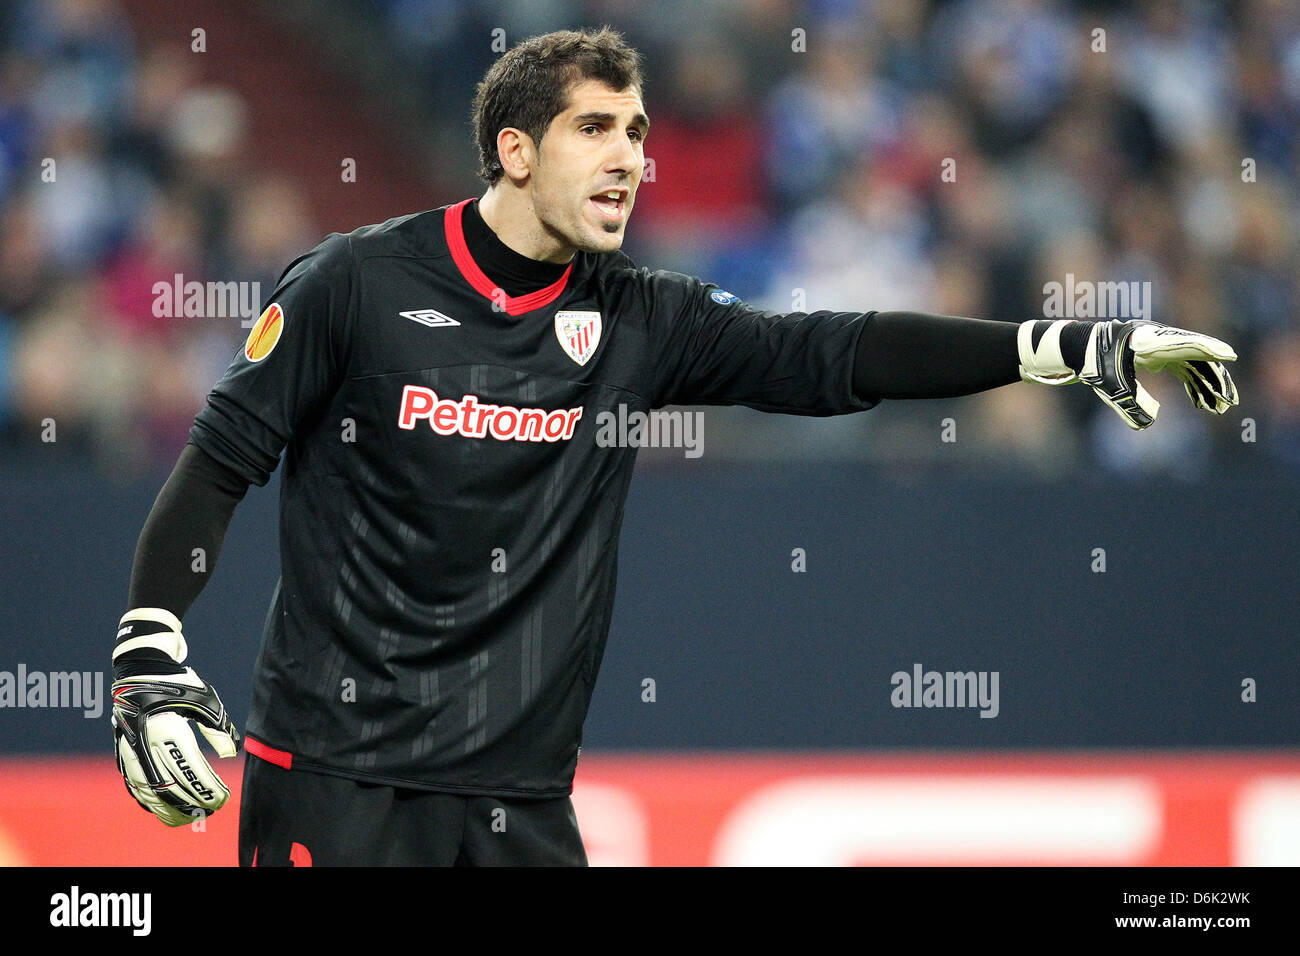 Bilbao's goalkeeper Gorka Iraizoz gives instructions during the Europa League match between FC Schalke 04 and Atletic Bilbao at Veltins Arena in Gelsenkirchen, Germany, 29 March 2012. Photo: Revierfoto Stock Photo